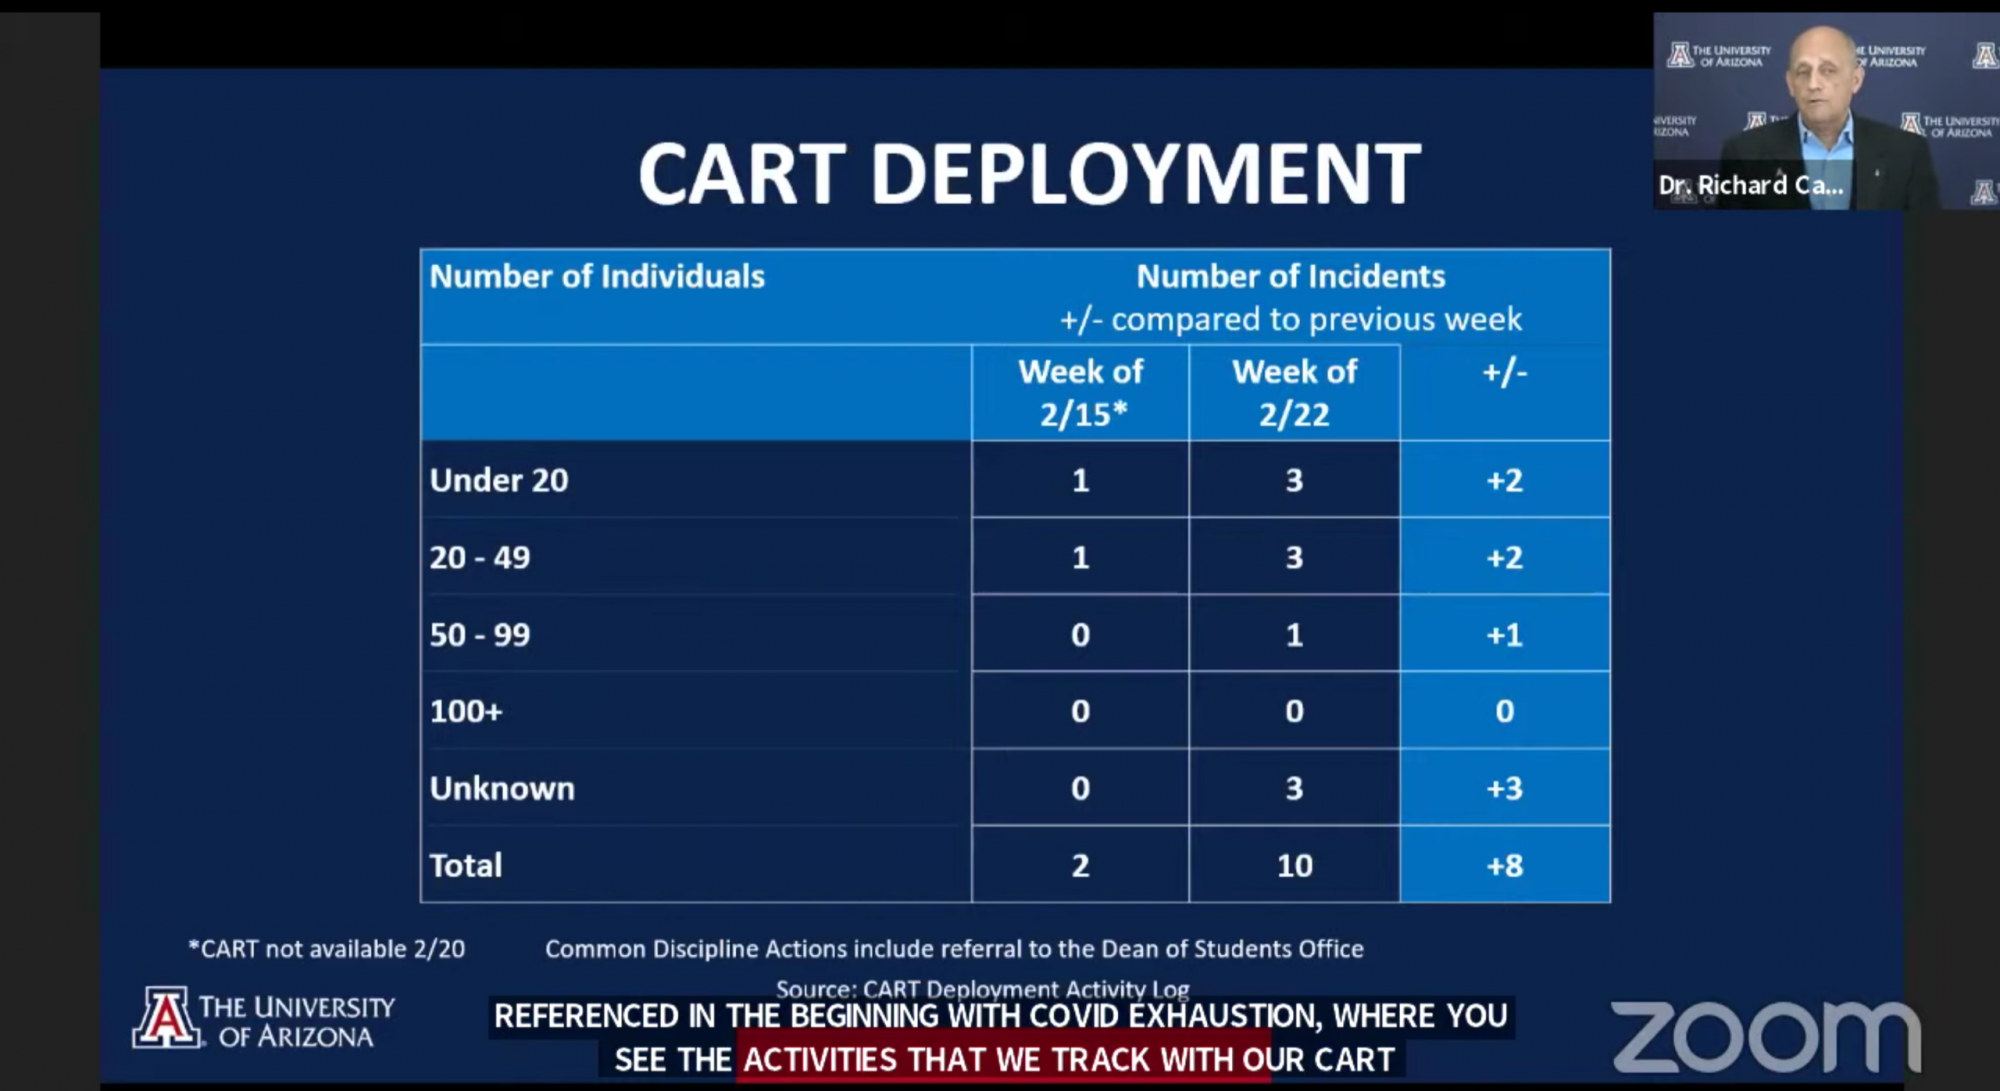 Screenshot of the university's recent CART deployment, indicating more gatherings in and around campus have required deployment than in the previous week.